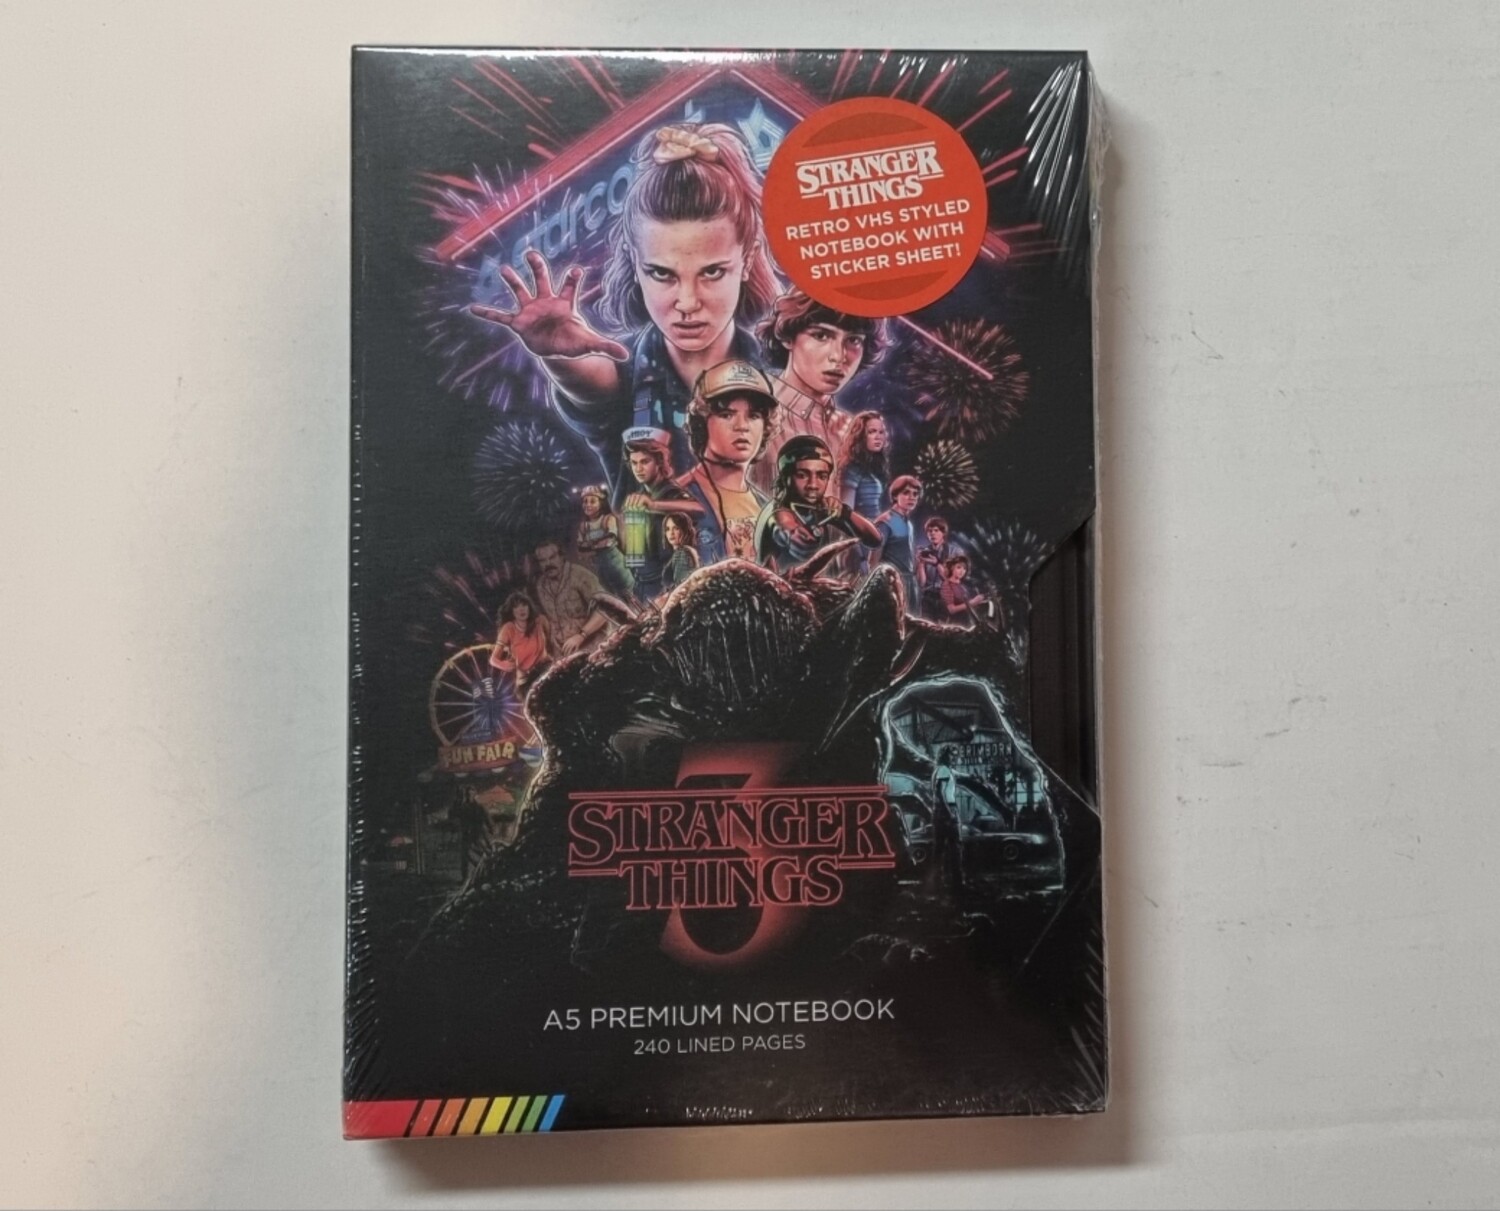 Notitieboek, A5, Stranger Things, VHS S3 Video